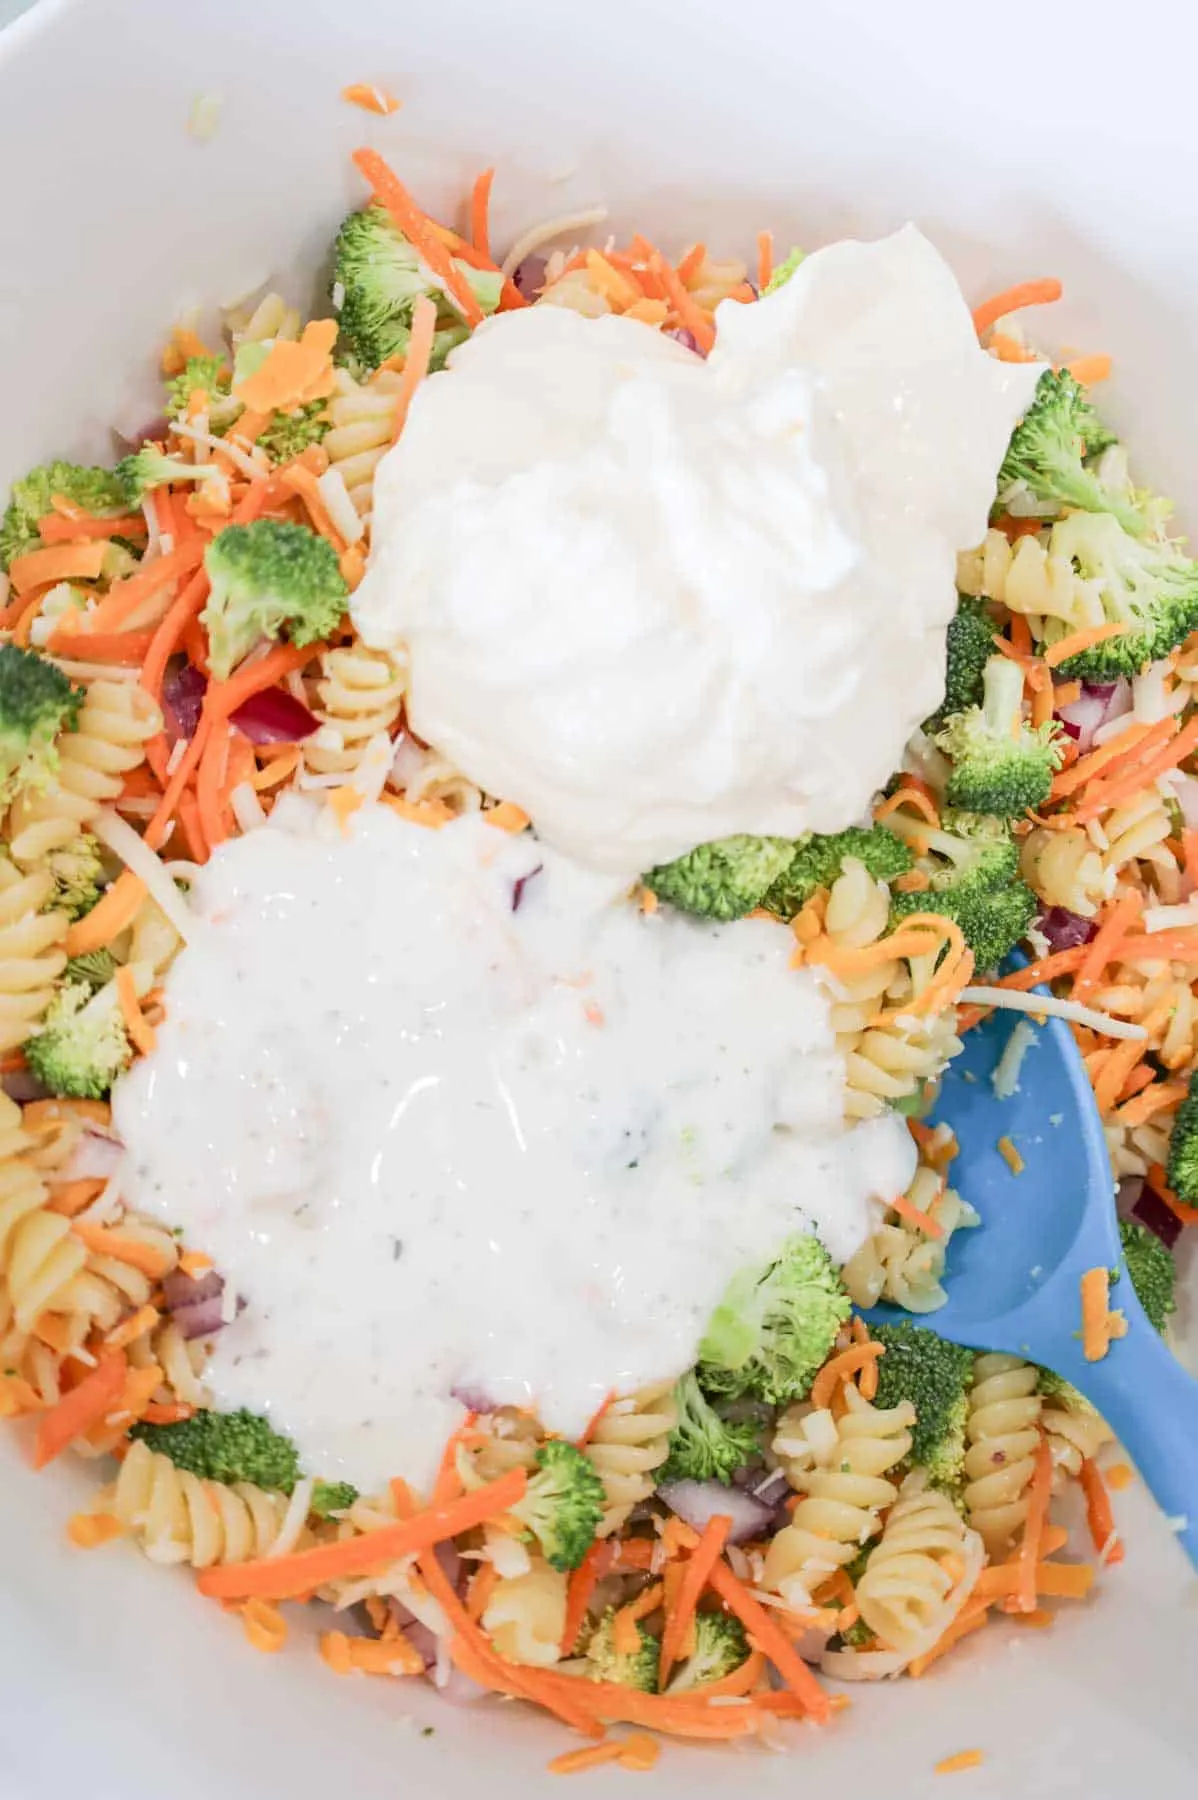 mayo and ranch dressing on top of broccoli pasta salad in a bowl